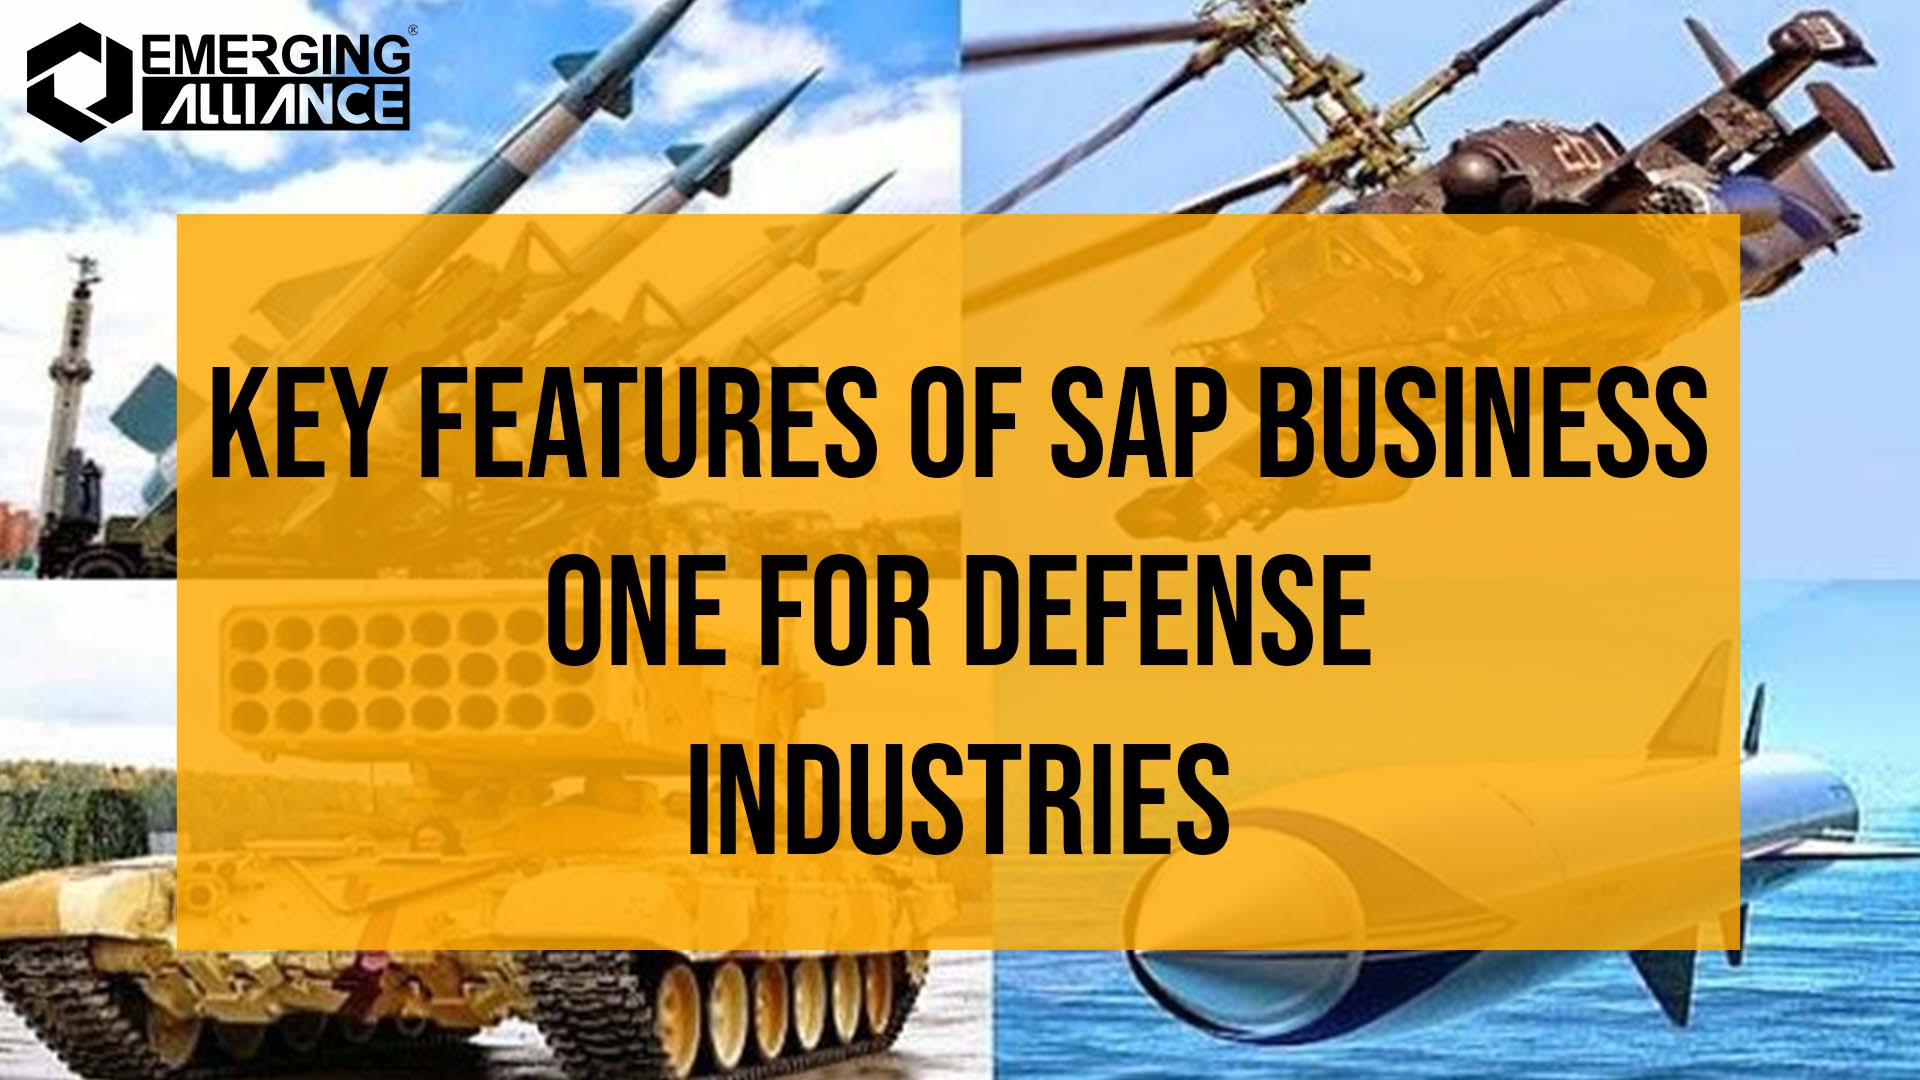 SAP Business One for Defense Industry